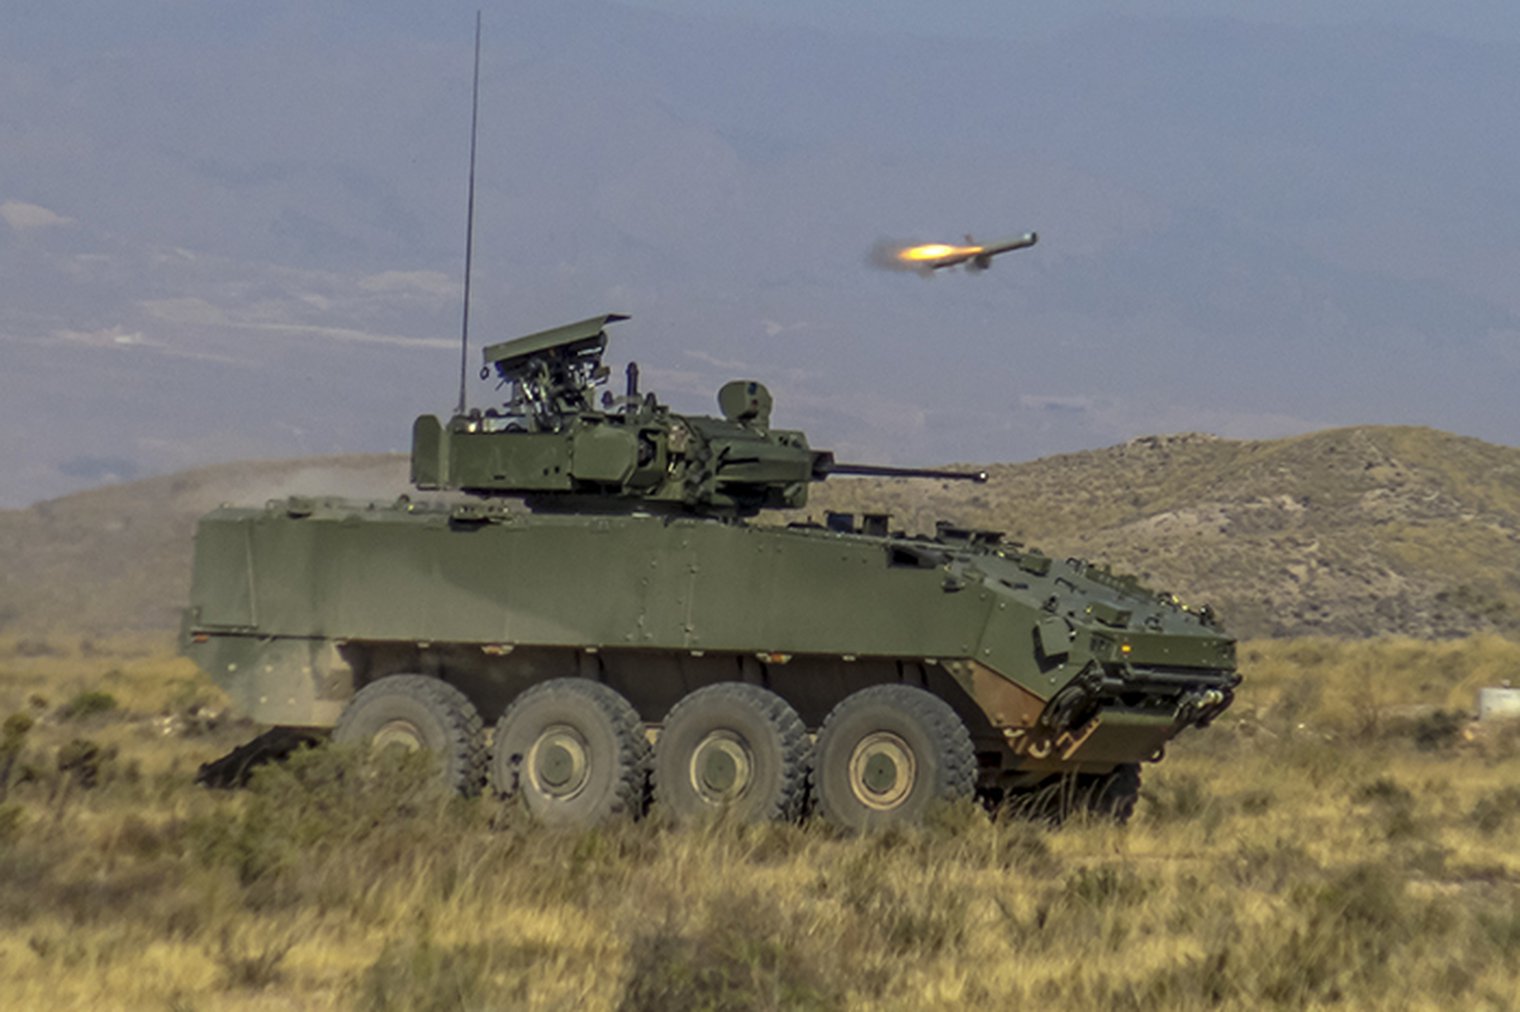 Shooting Tests Successfully Concluded with VCR 8Ã—8 Dragon Wheeled Combat Vehicle